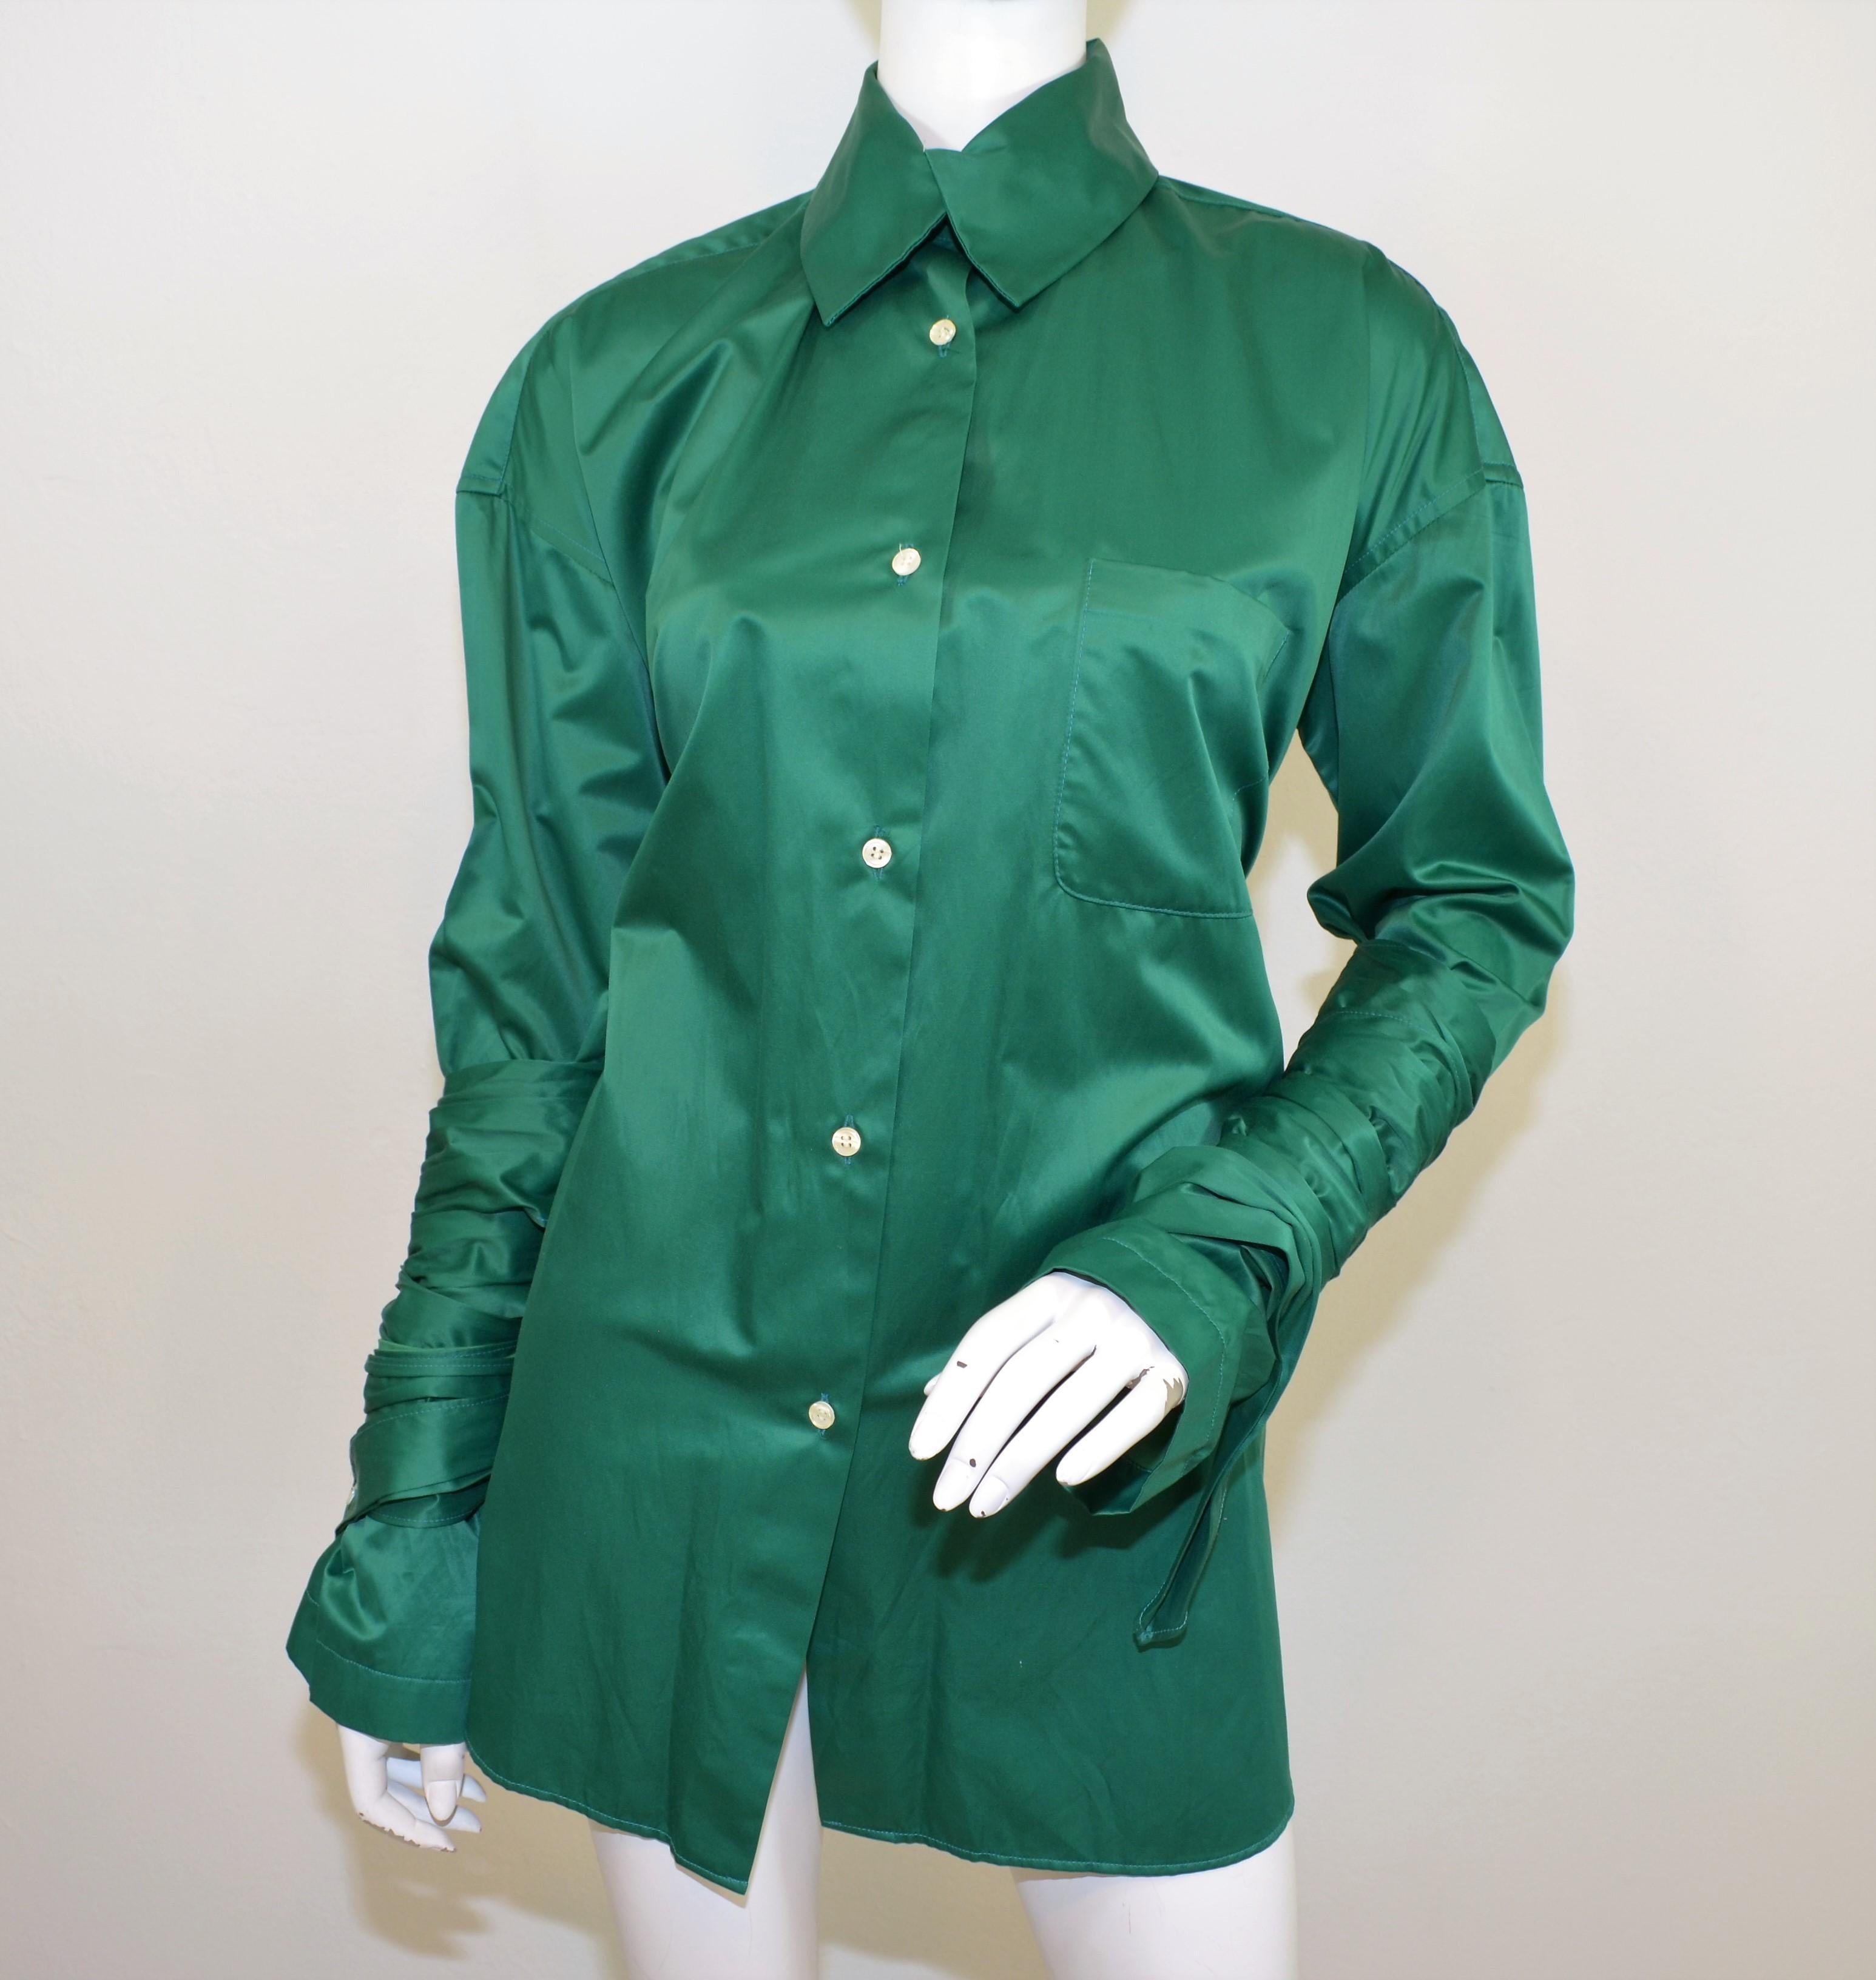 Romeo Gigli top is featured in a Kelly green with button closures and a wraparound detail around the sleeves. Top is in excellent condition.

Measurements:
Bust 52''
Sleeves 23''
Length 34''
Shoulder to Shoulder 